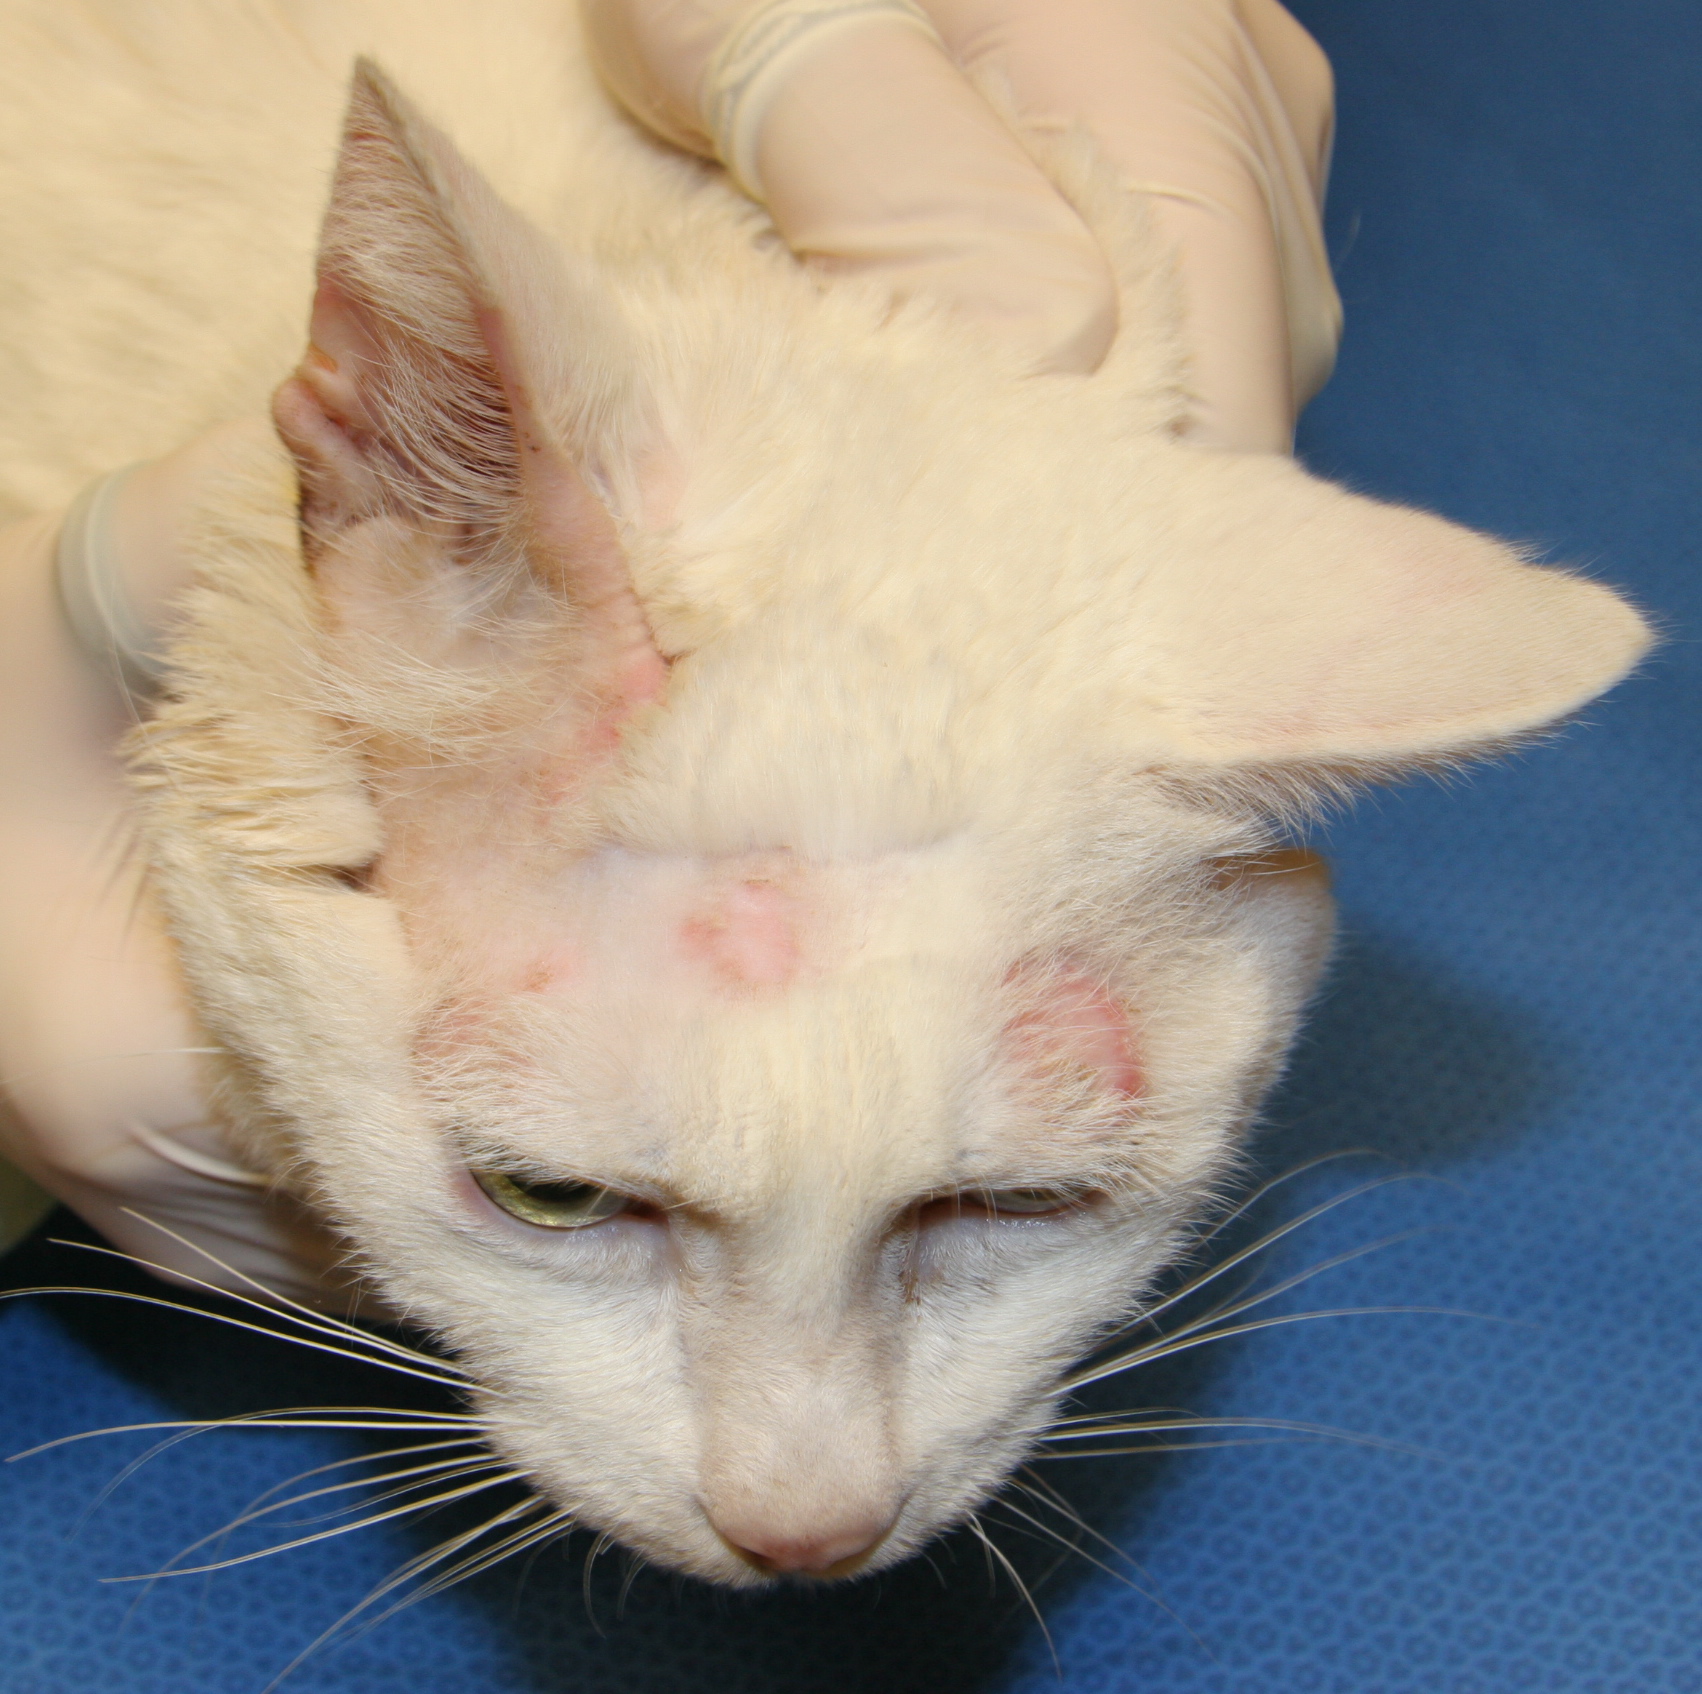 Fungal Ear Infection Cats toxoplasmosis